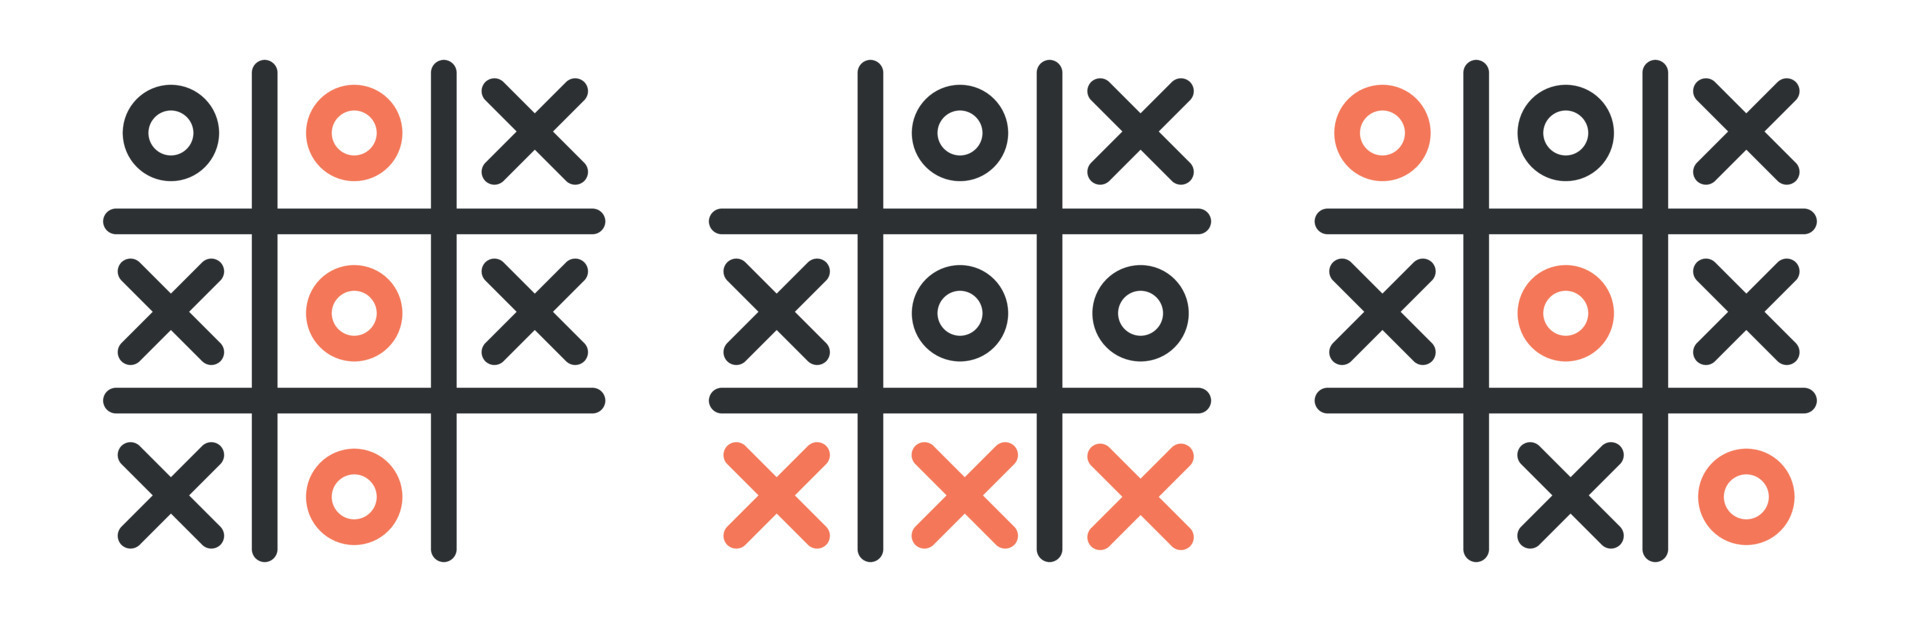 How to Win Tic Tac Toe Game 